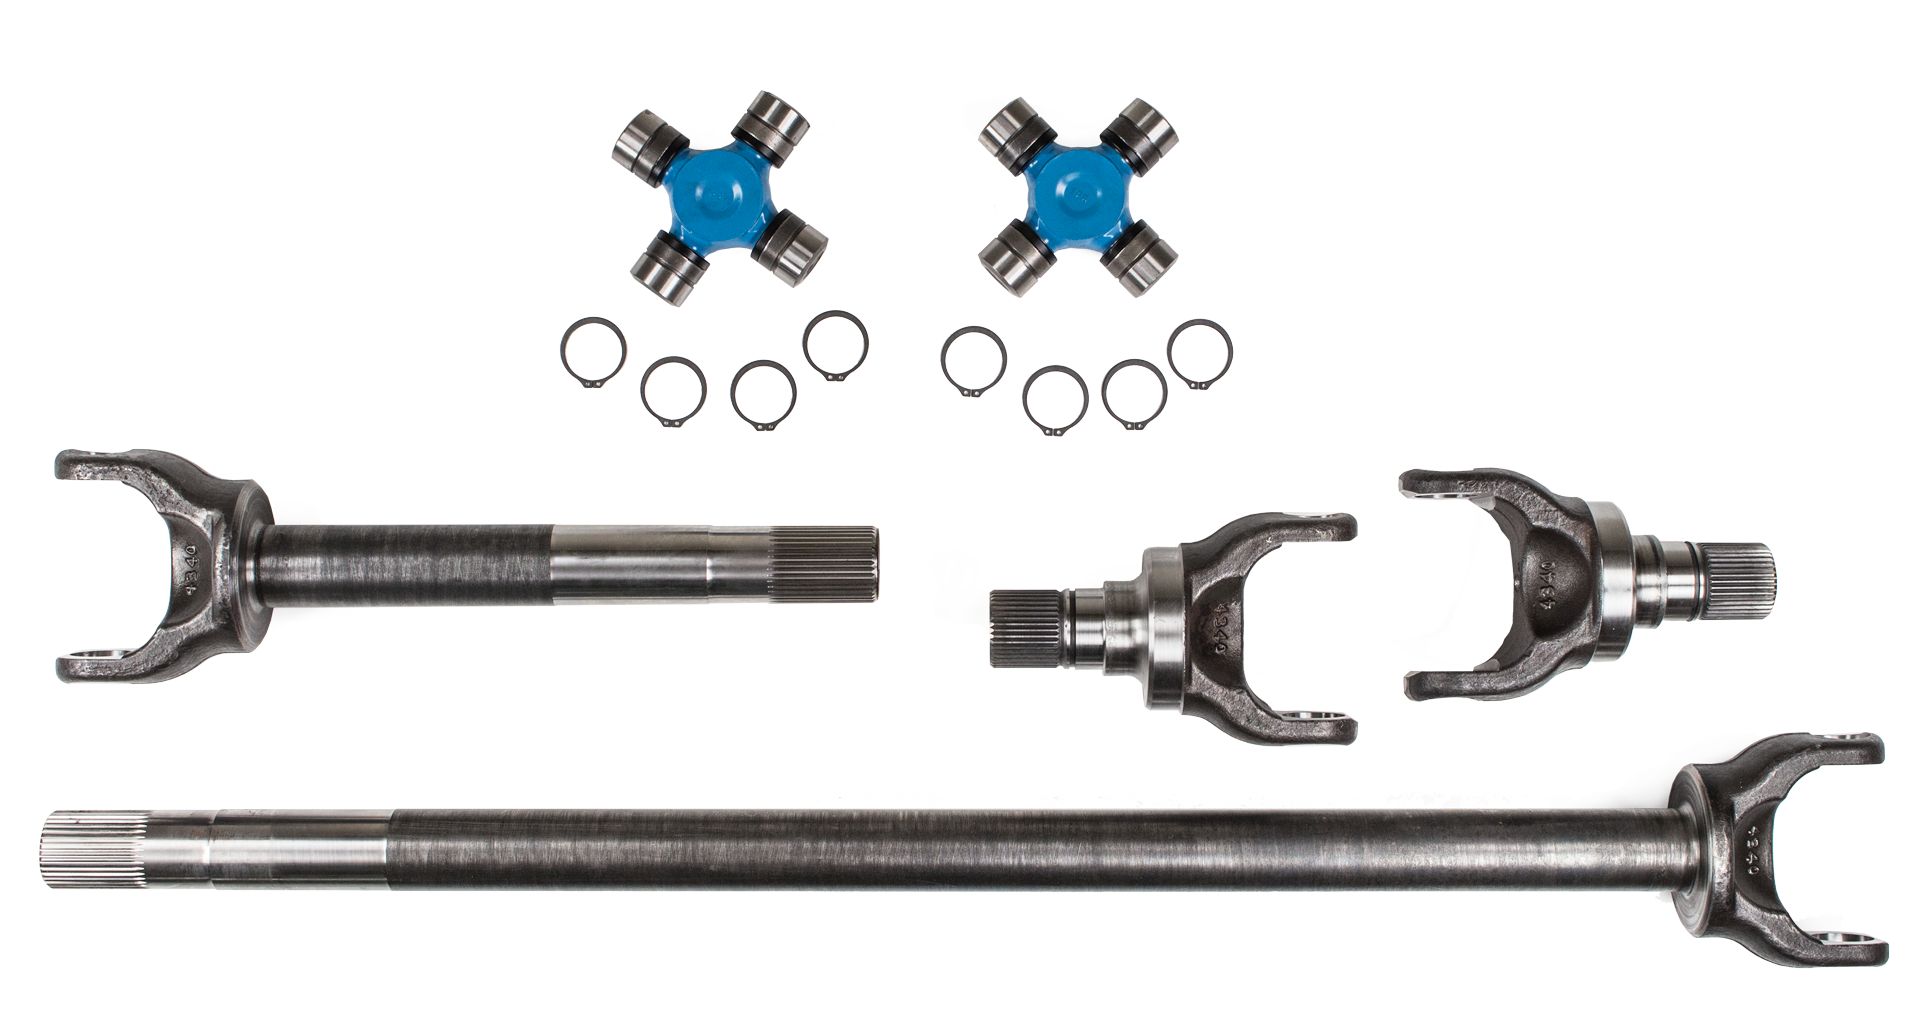 Ready to level up your Super Duty axle game?